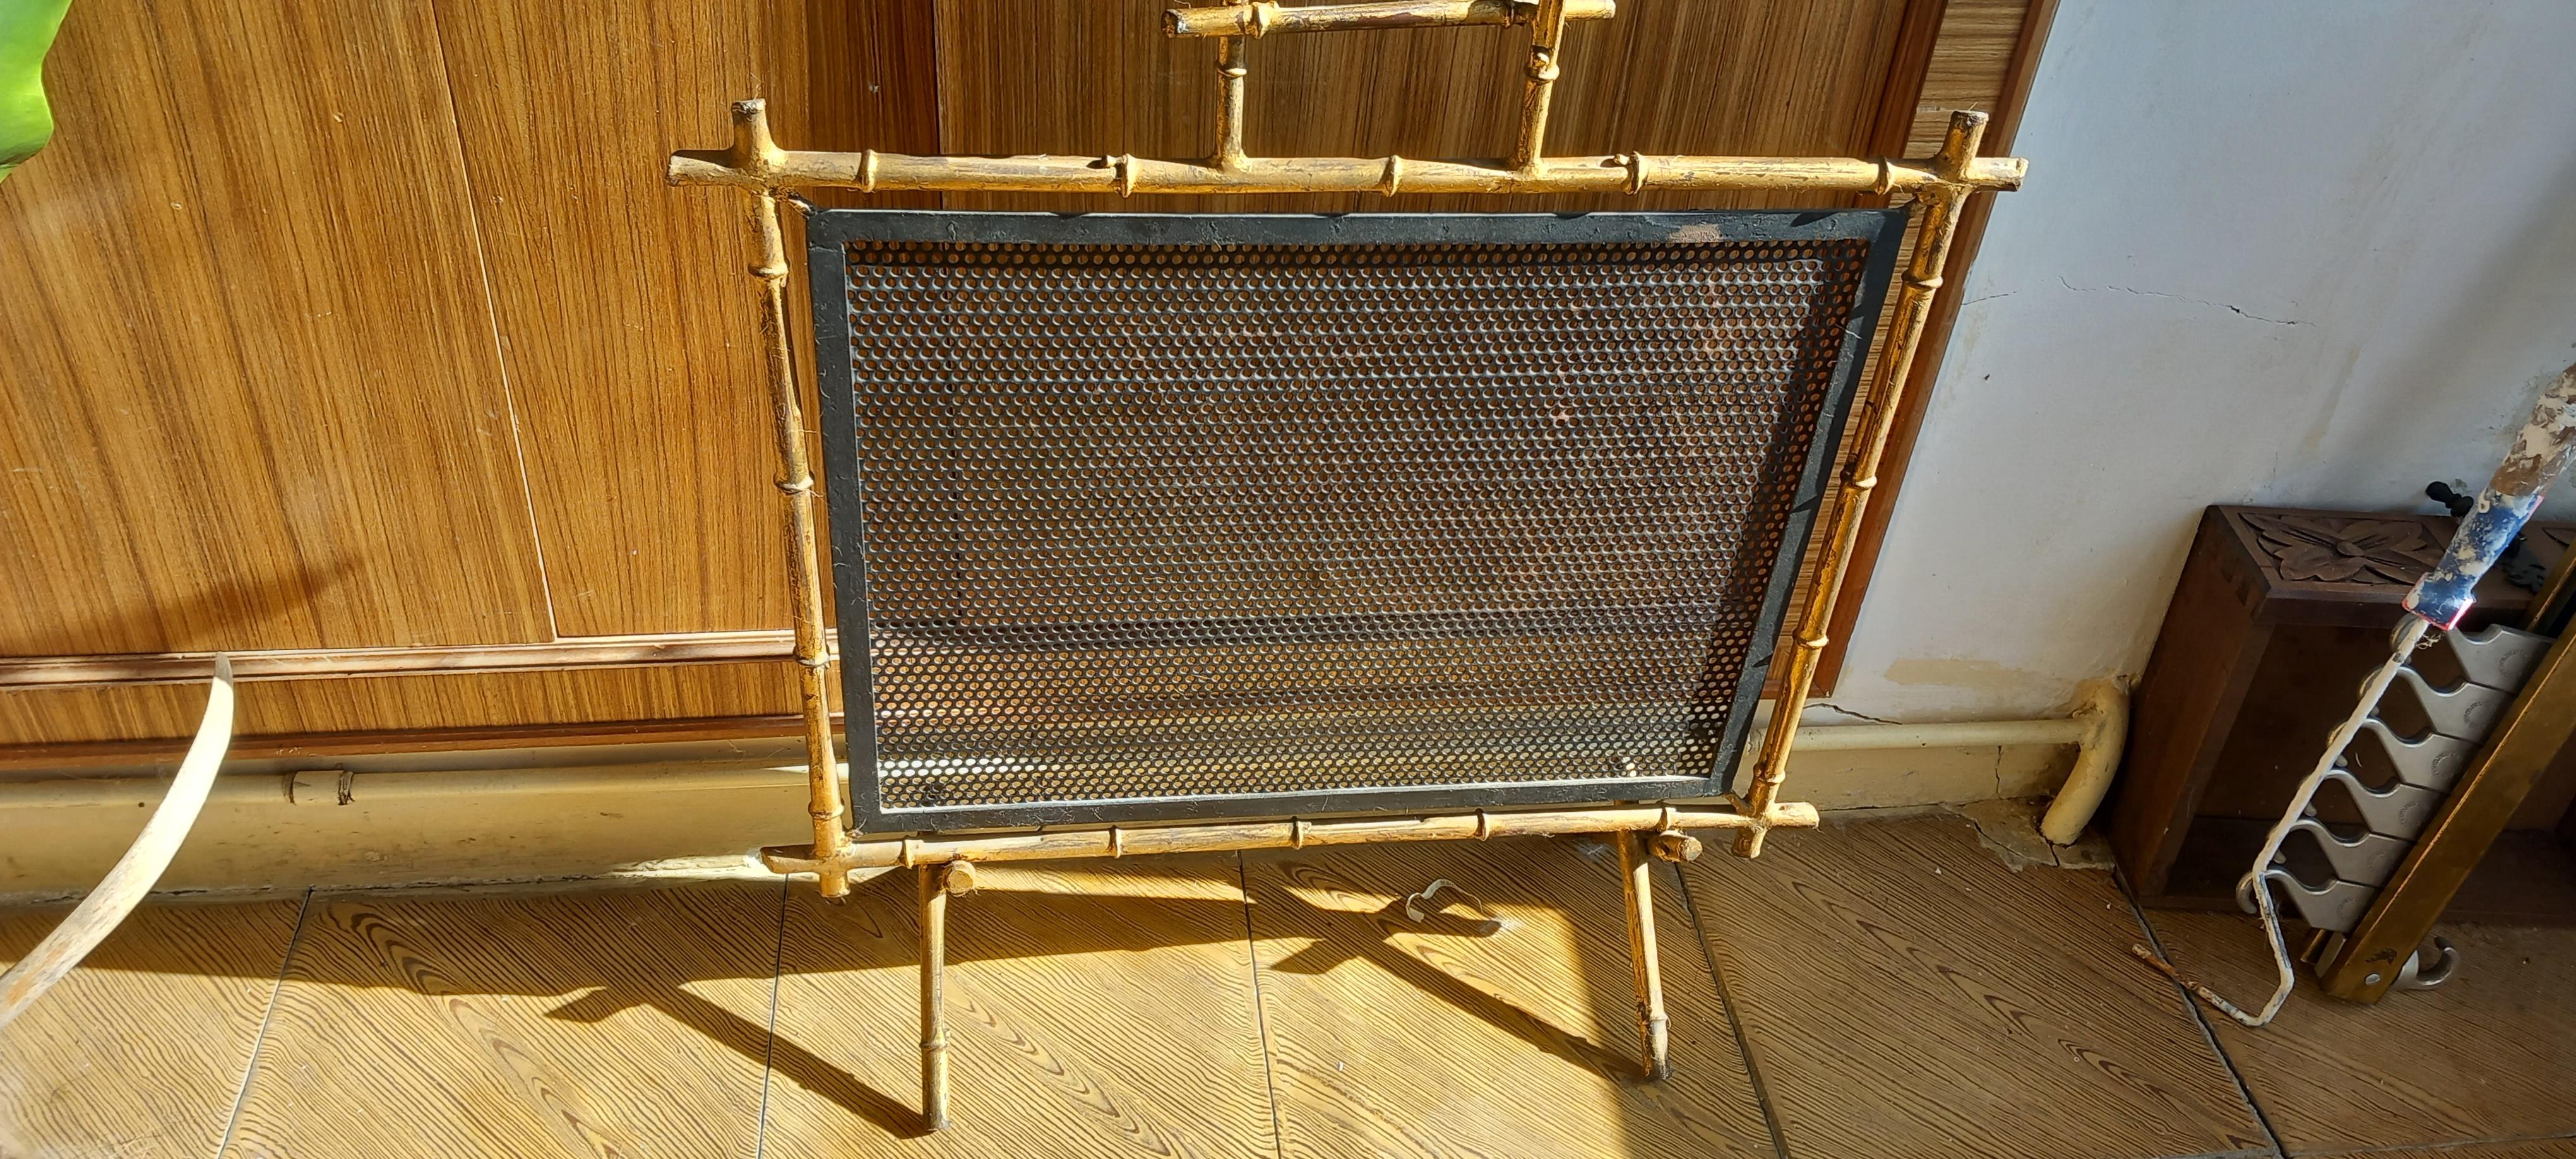 Fire Screen Hollywood Regency  Iron and Gold Leaf Faux Bamboo  Mid 20th Century For Sale 5